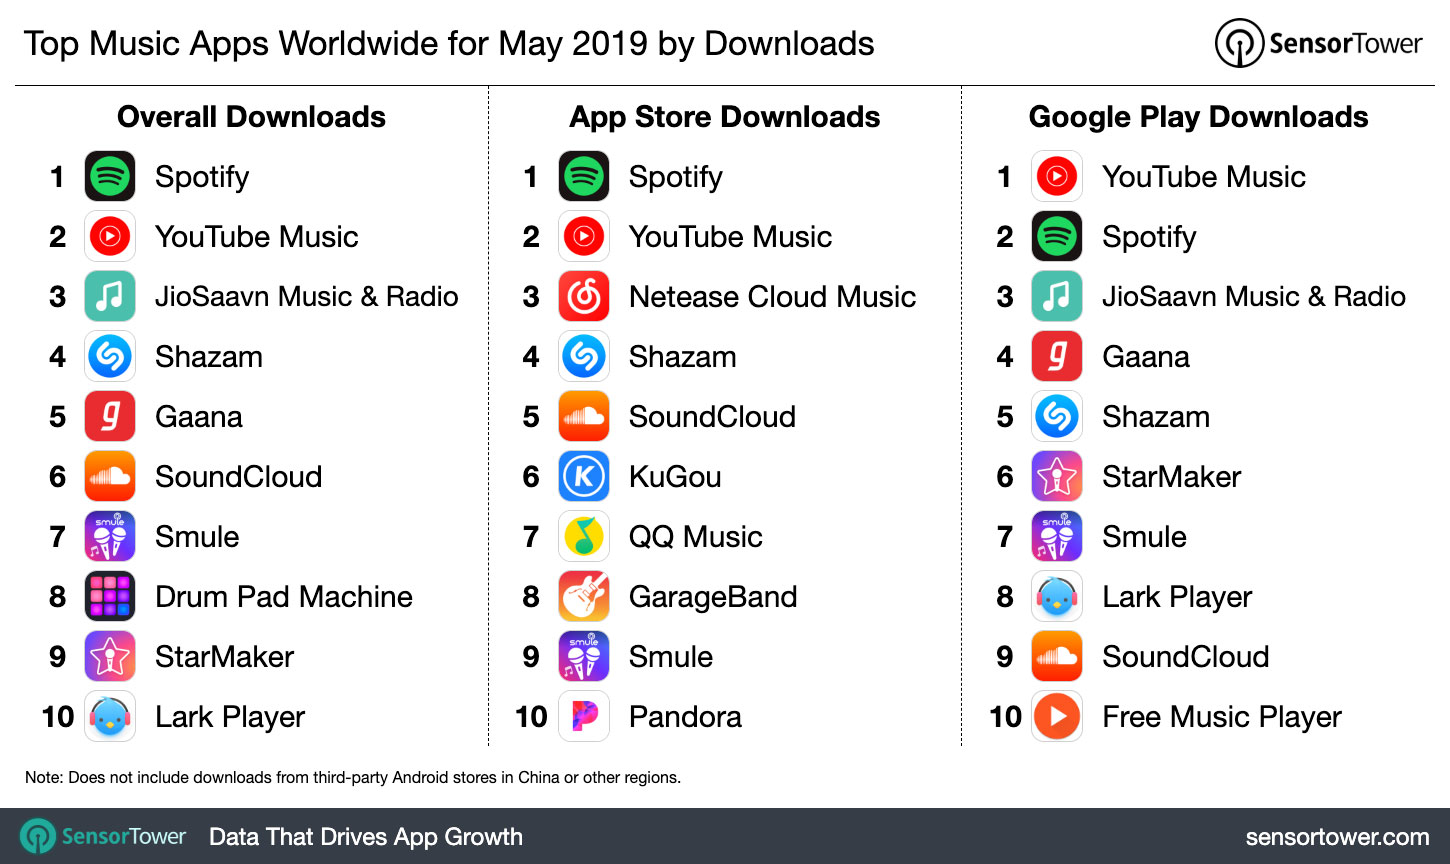 Top Music Apps Worldwide for May 2019 by Downloads